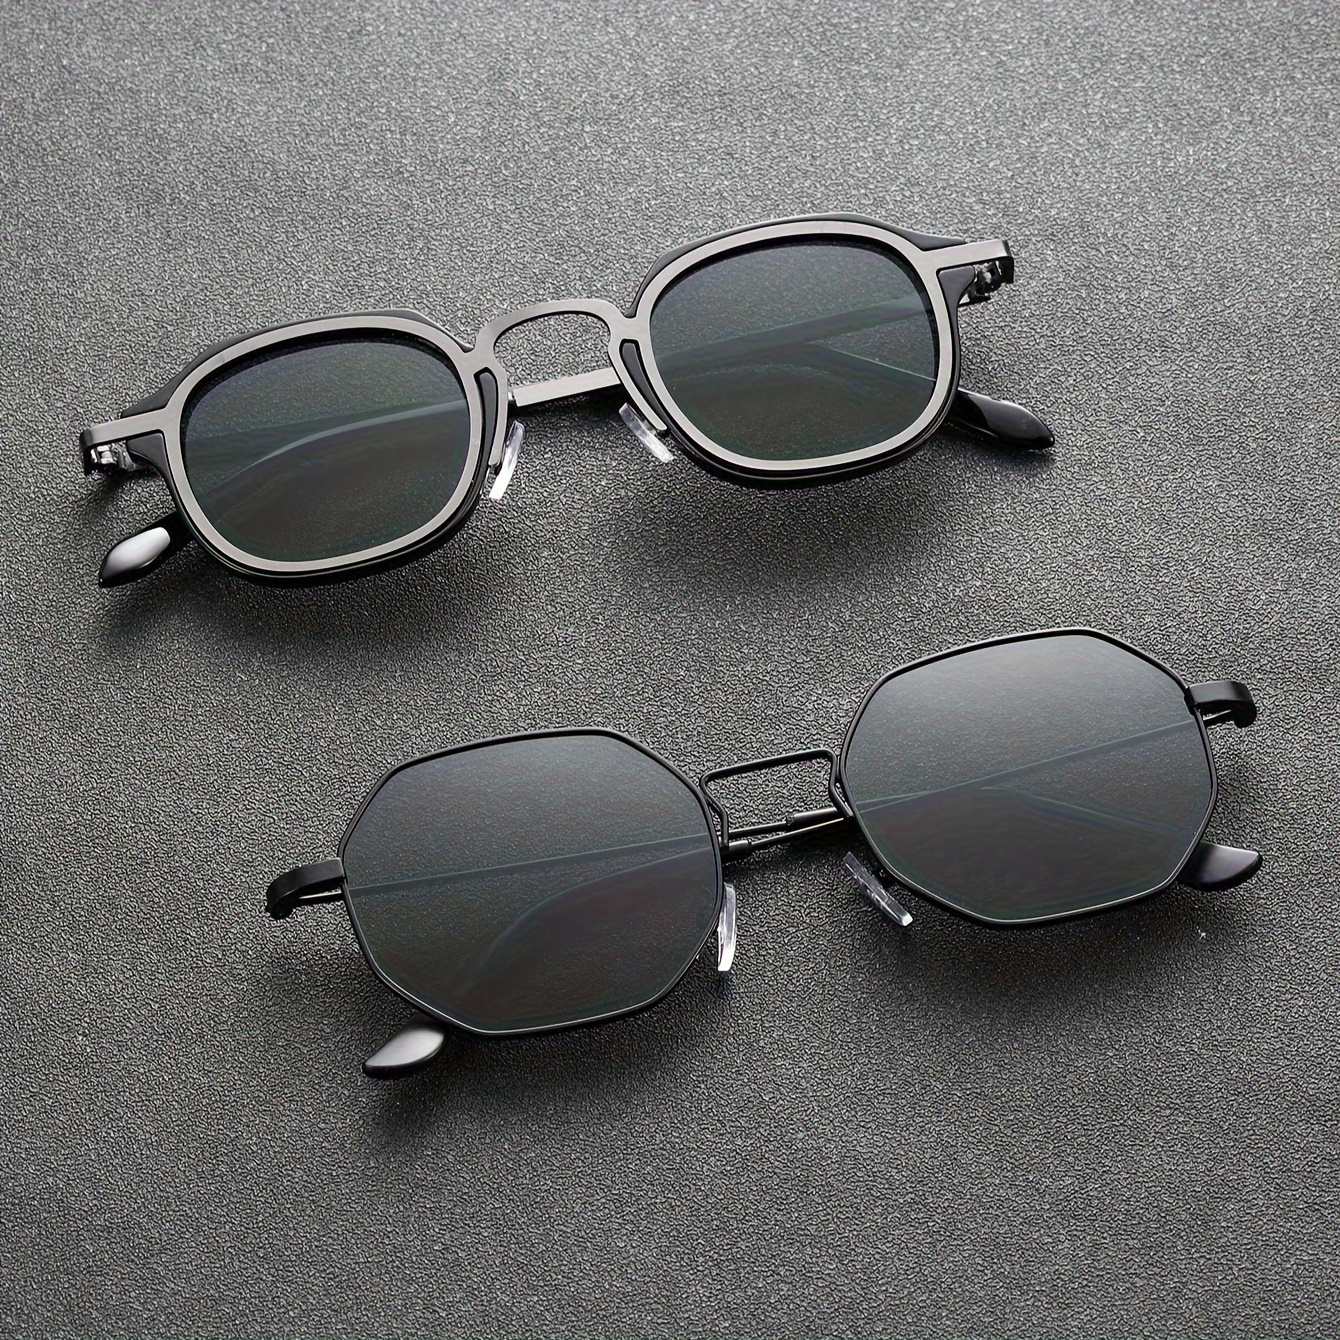 

2pcs Trendy Vintage Classic Geometric Frame Metal Fashion Glasses For Men - Outdoor Daily Life Driving Clothing Accessories